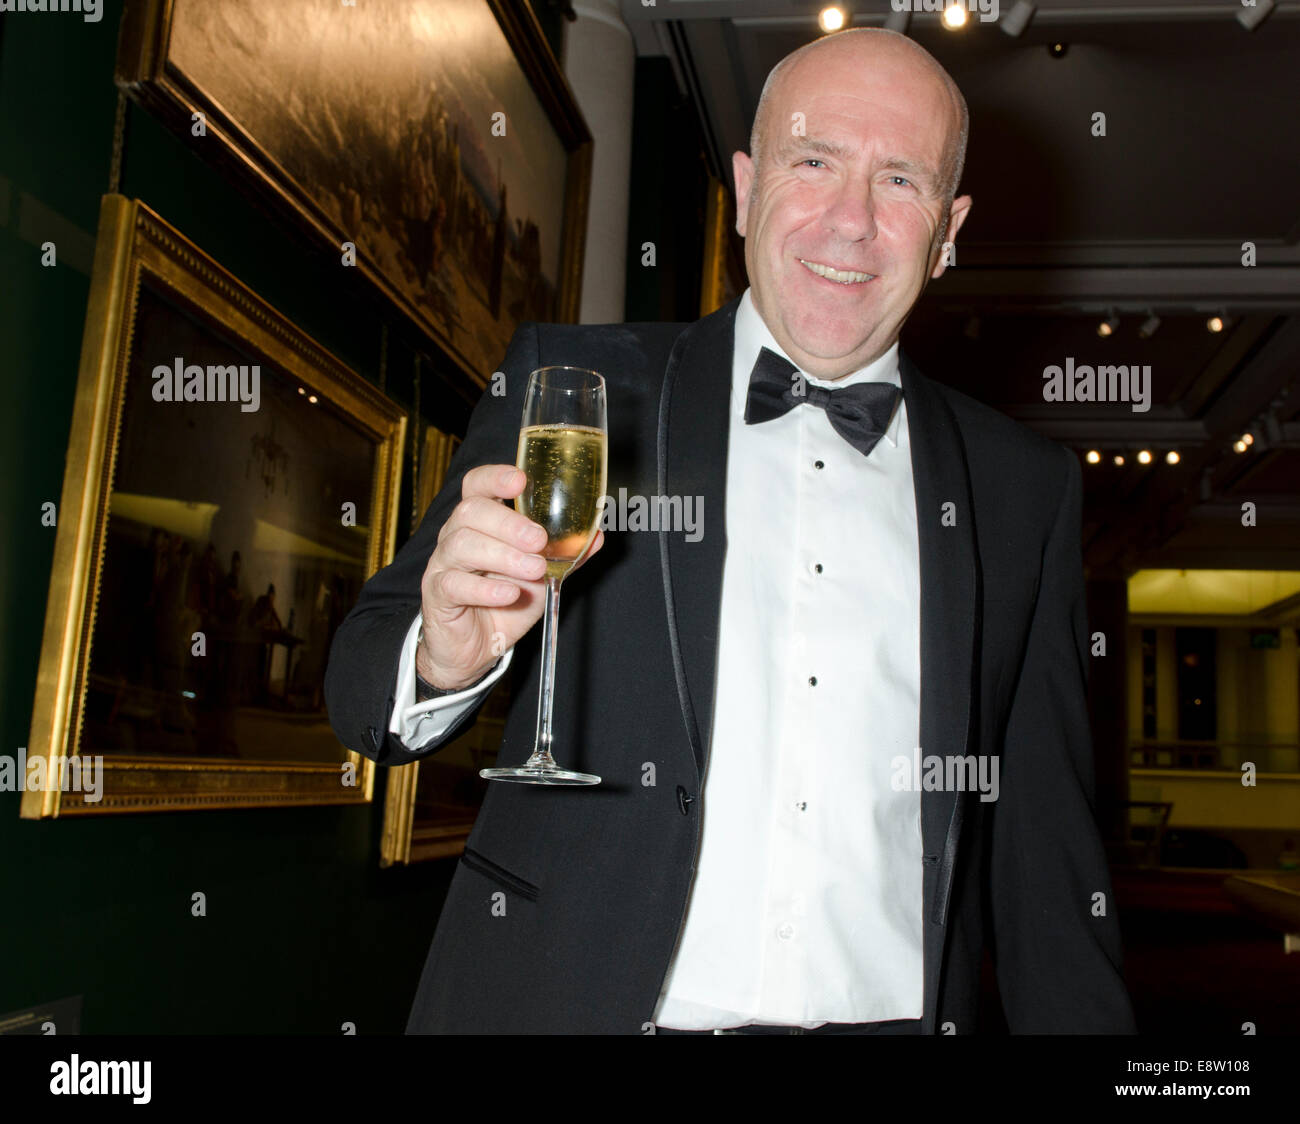 Man Booker Prize for Fiction 2014 winner Richard Flanagan for The Narrow Road to the Deep North (Chatto & Windus) celebrates after winning prize Credit:  Prixnews Alamy Live News London, UK. 14th October, 2014. Stock Photo